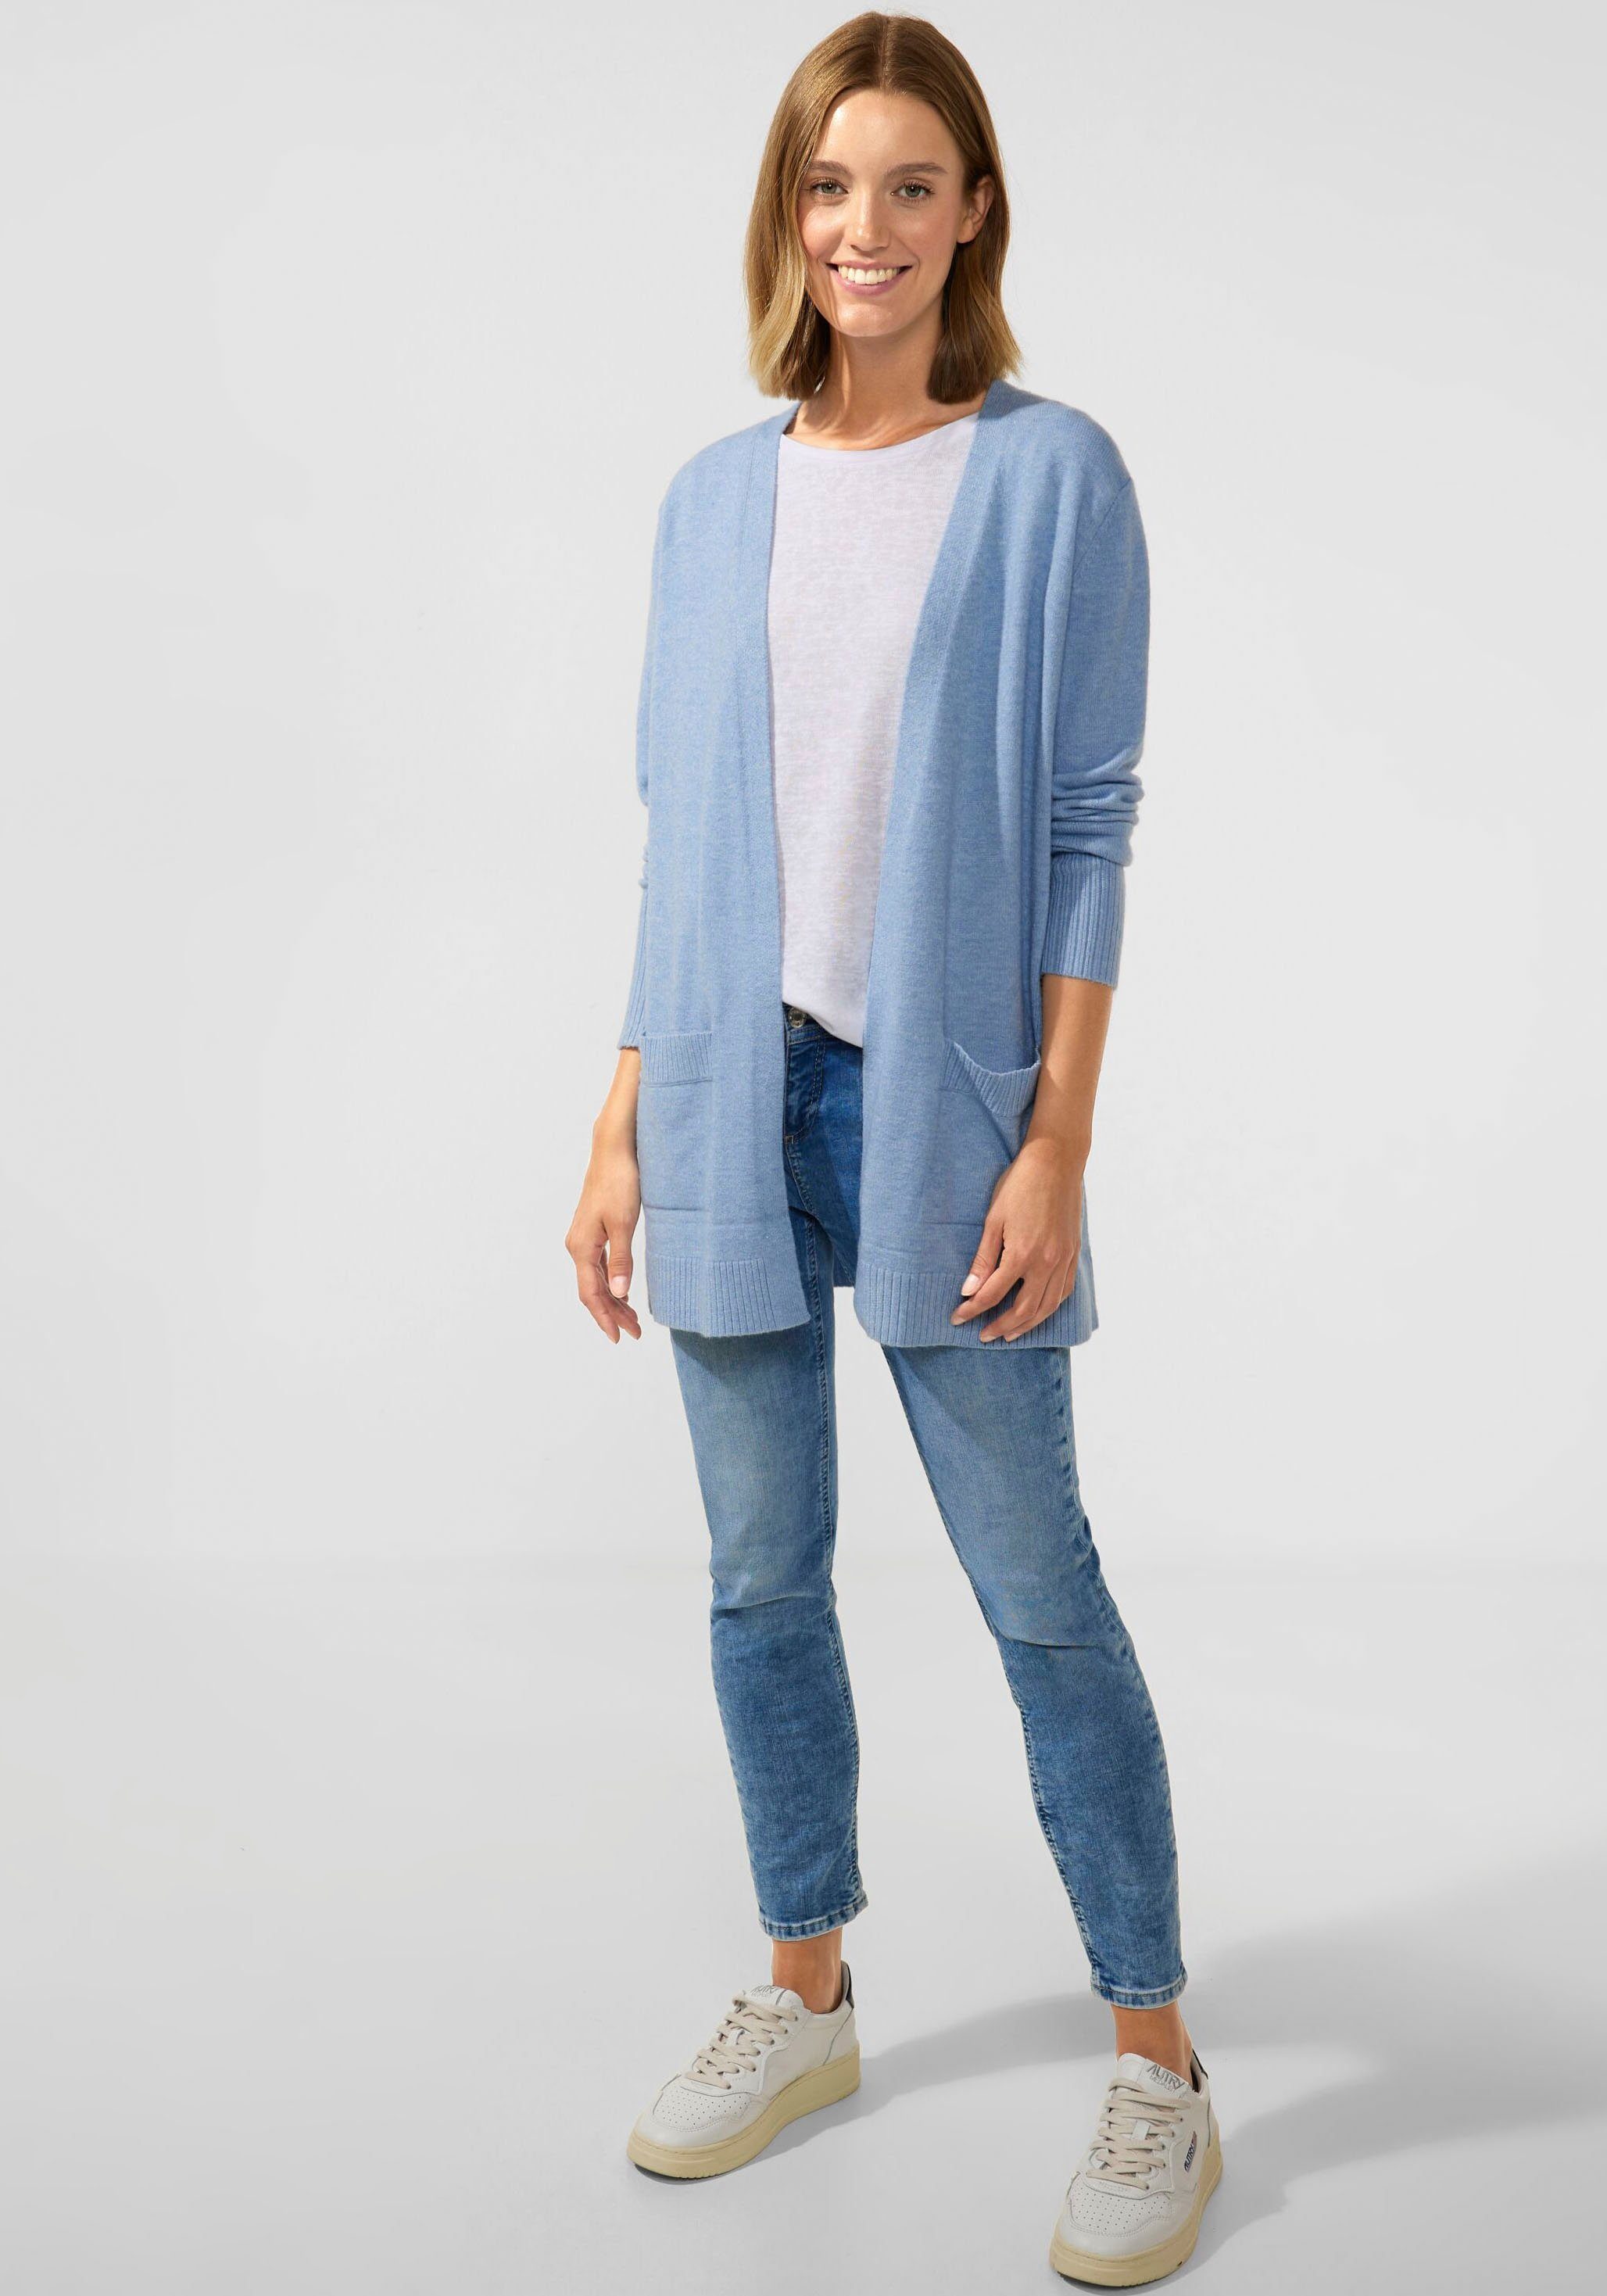 STREET ONE Unifarbe blue in feather Cardigan